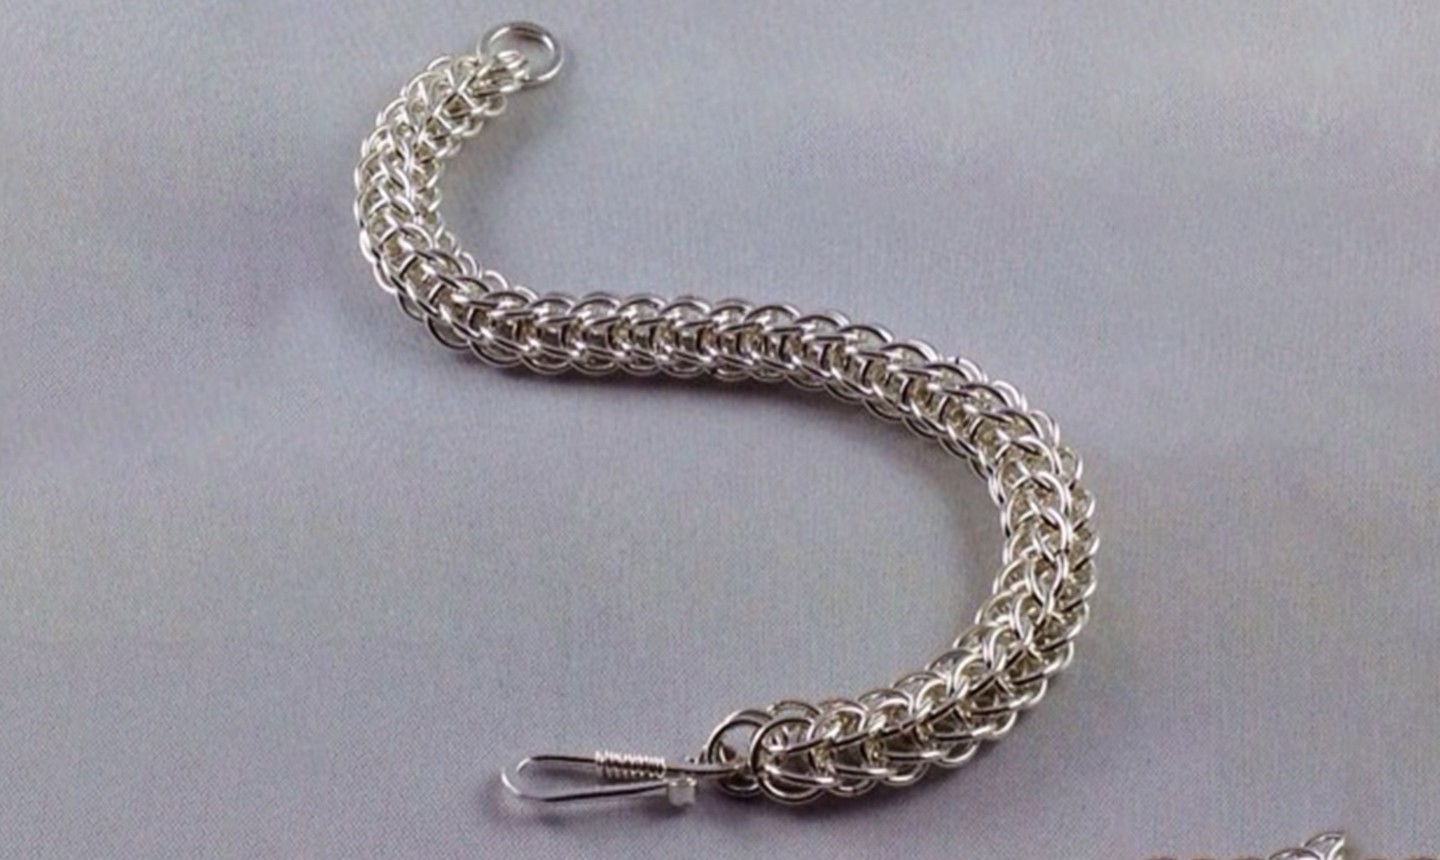 Bracelet with Matt silver magnetic clasp and RD53 cable